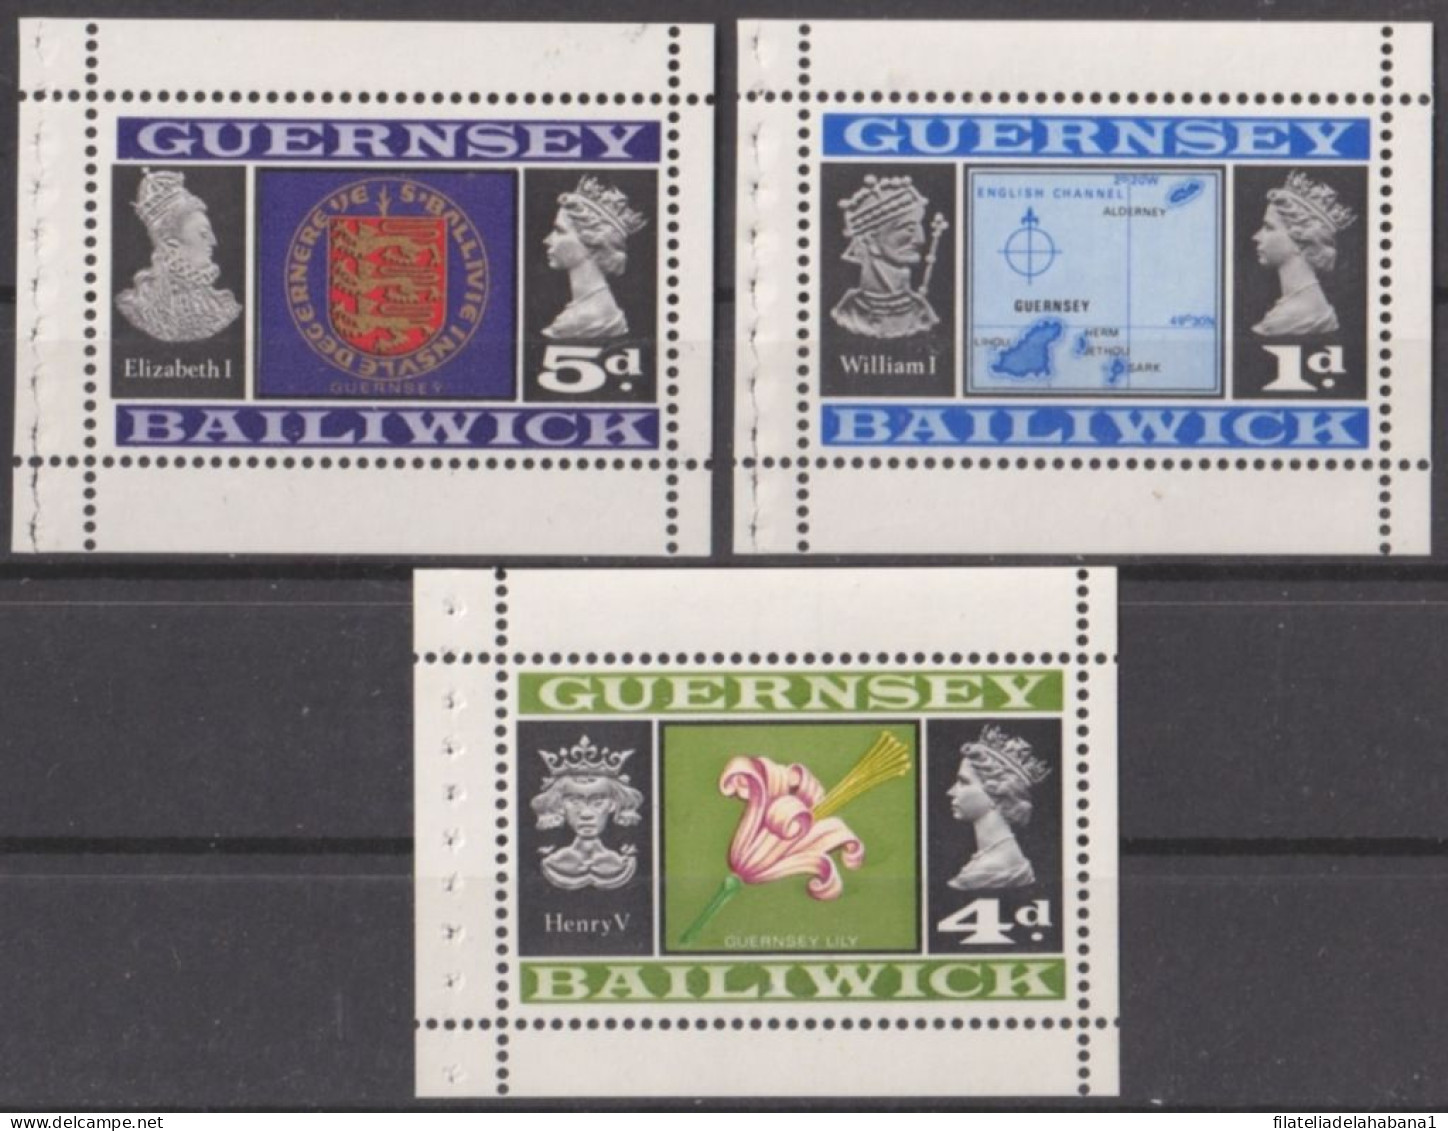 F-EX50275 GUERNSEY ENGLAND UK GB MNH 1965-70 BOOKLET LILY FLOWER MAP COAST ARMS.  - Guernesey